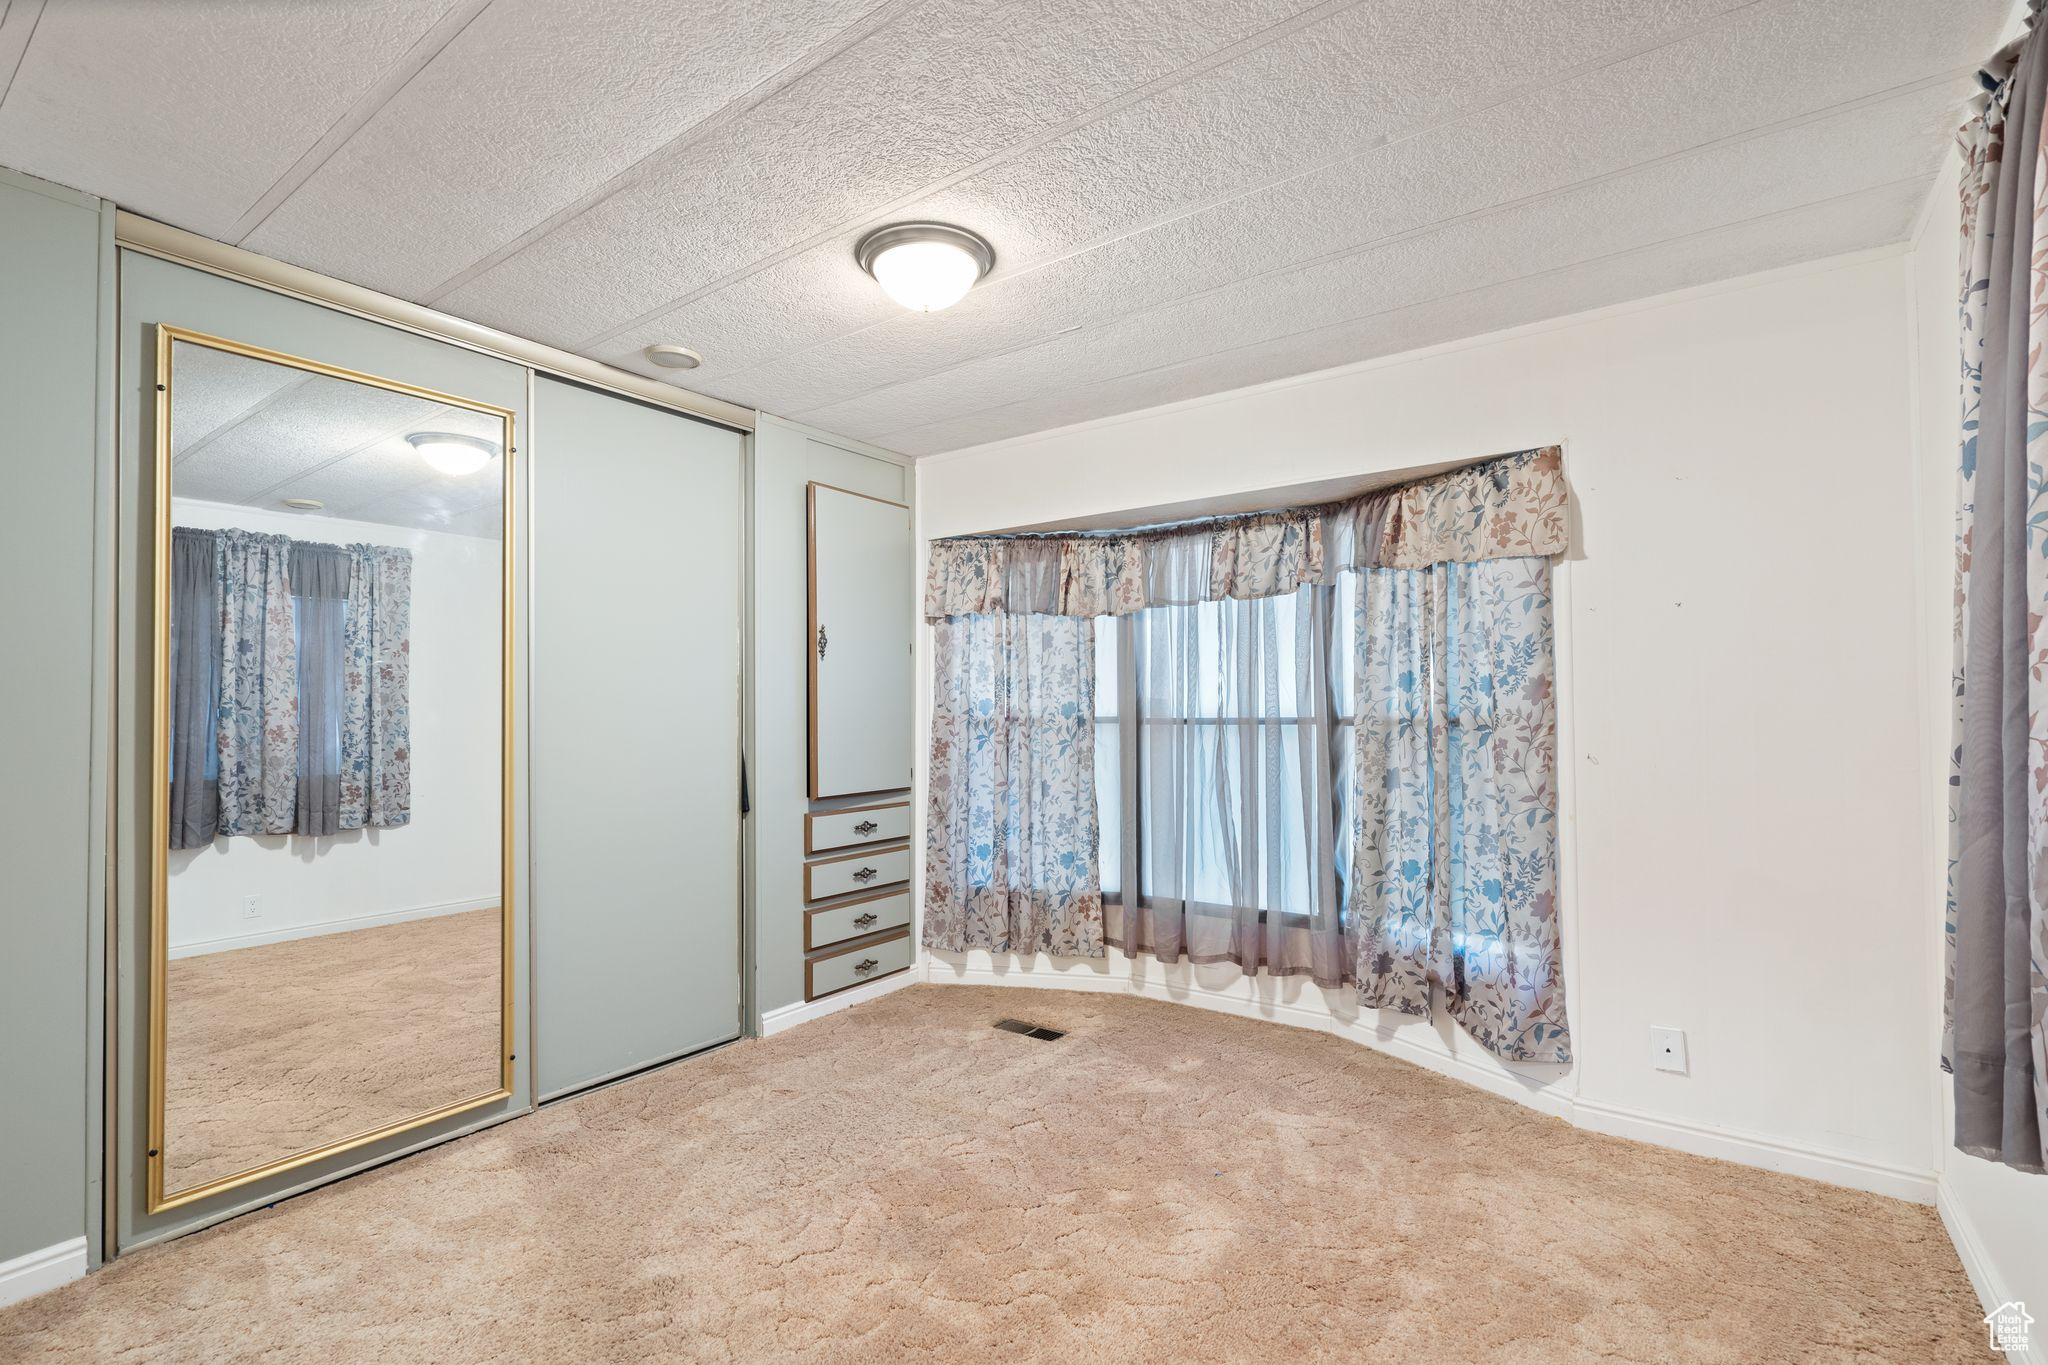 Unfurnished room featuring light colored carpet and a textured ceiling